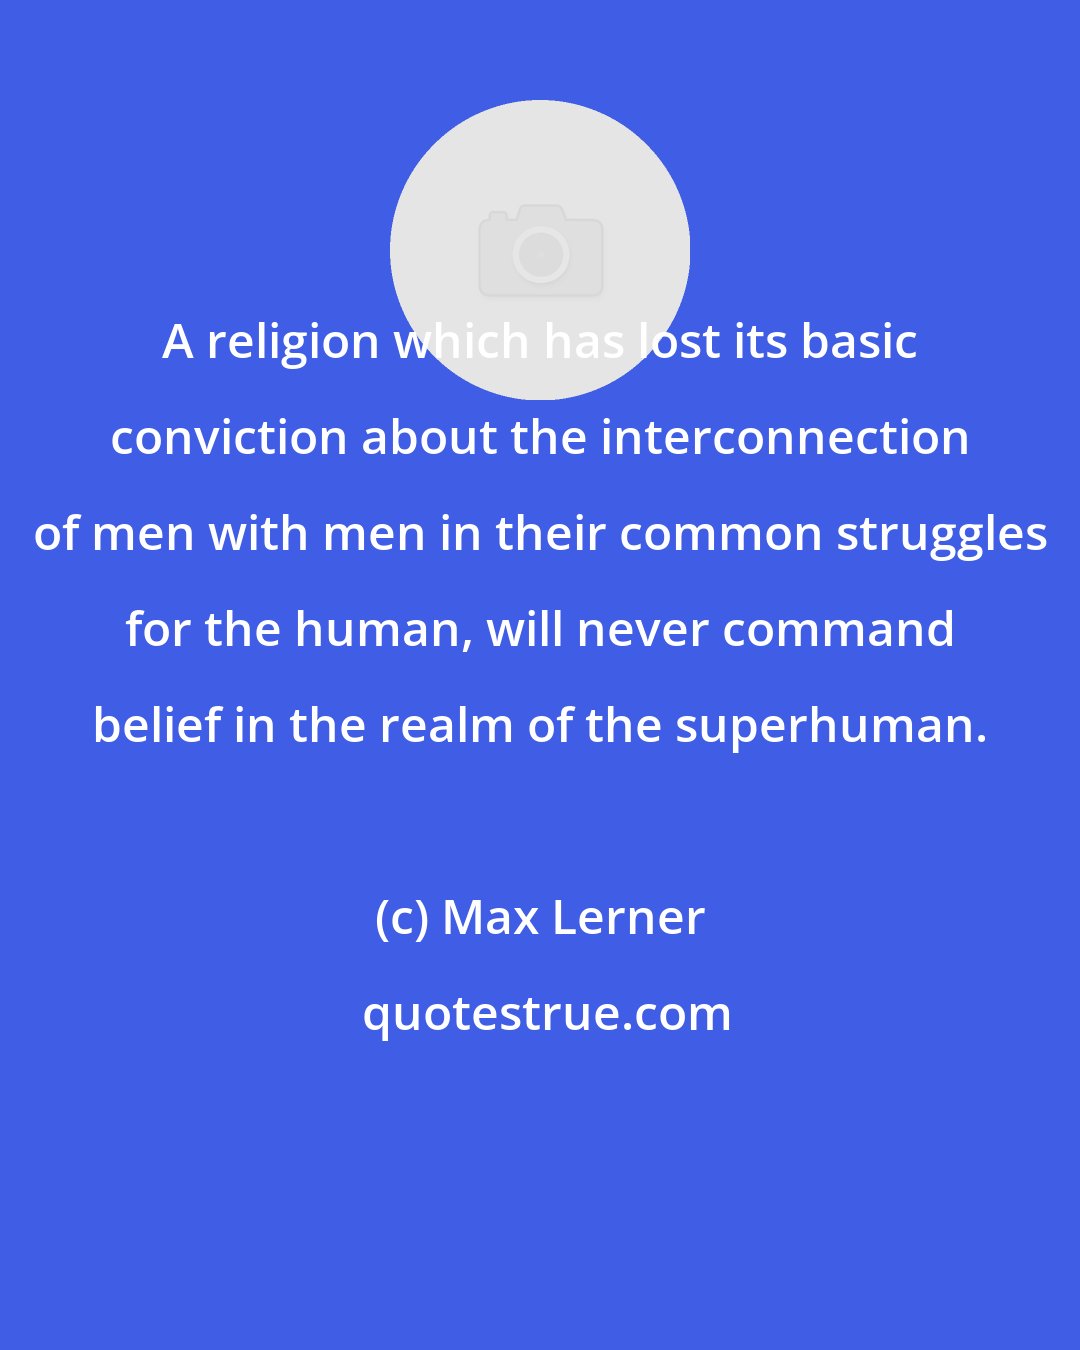 Max Lerner: A religion which has lost its basic conviction about the interconnection of men with men in their common struggles for the human, will never command belief in the realm of the superhuman.